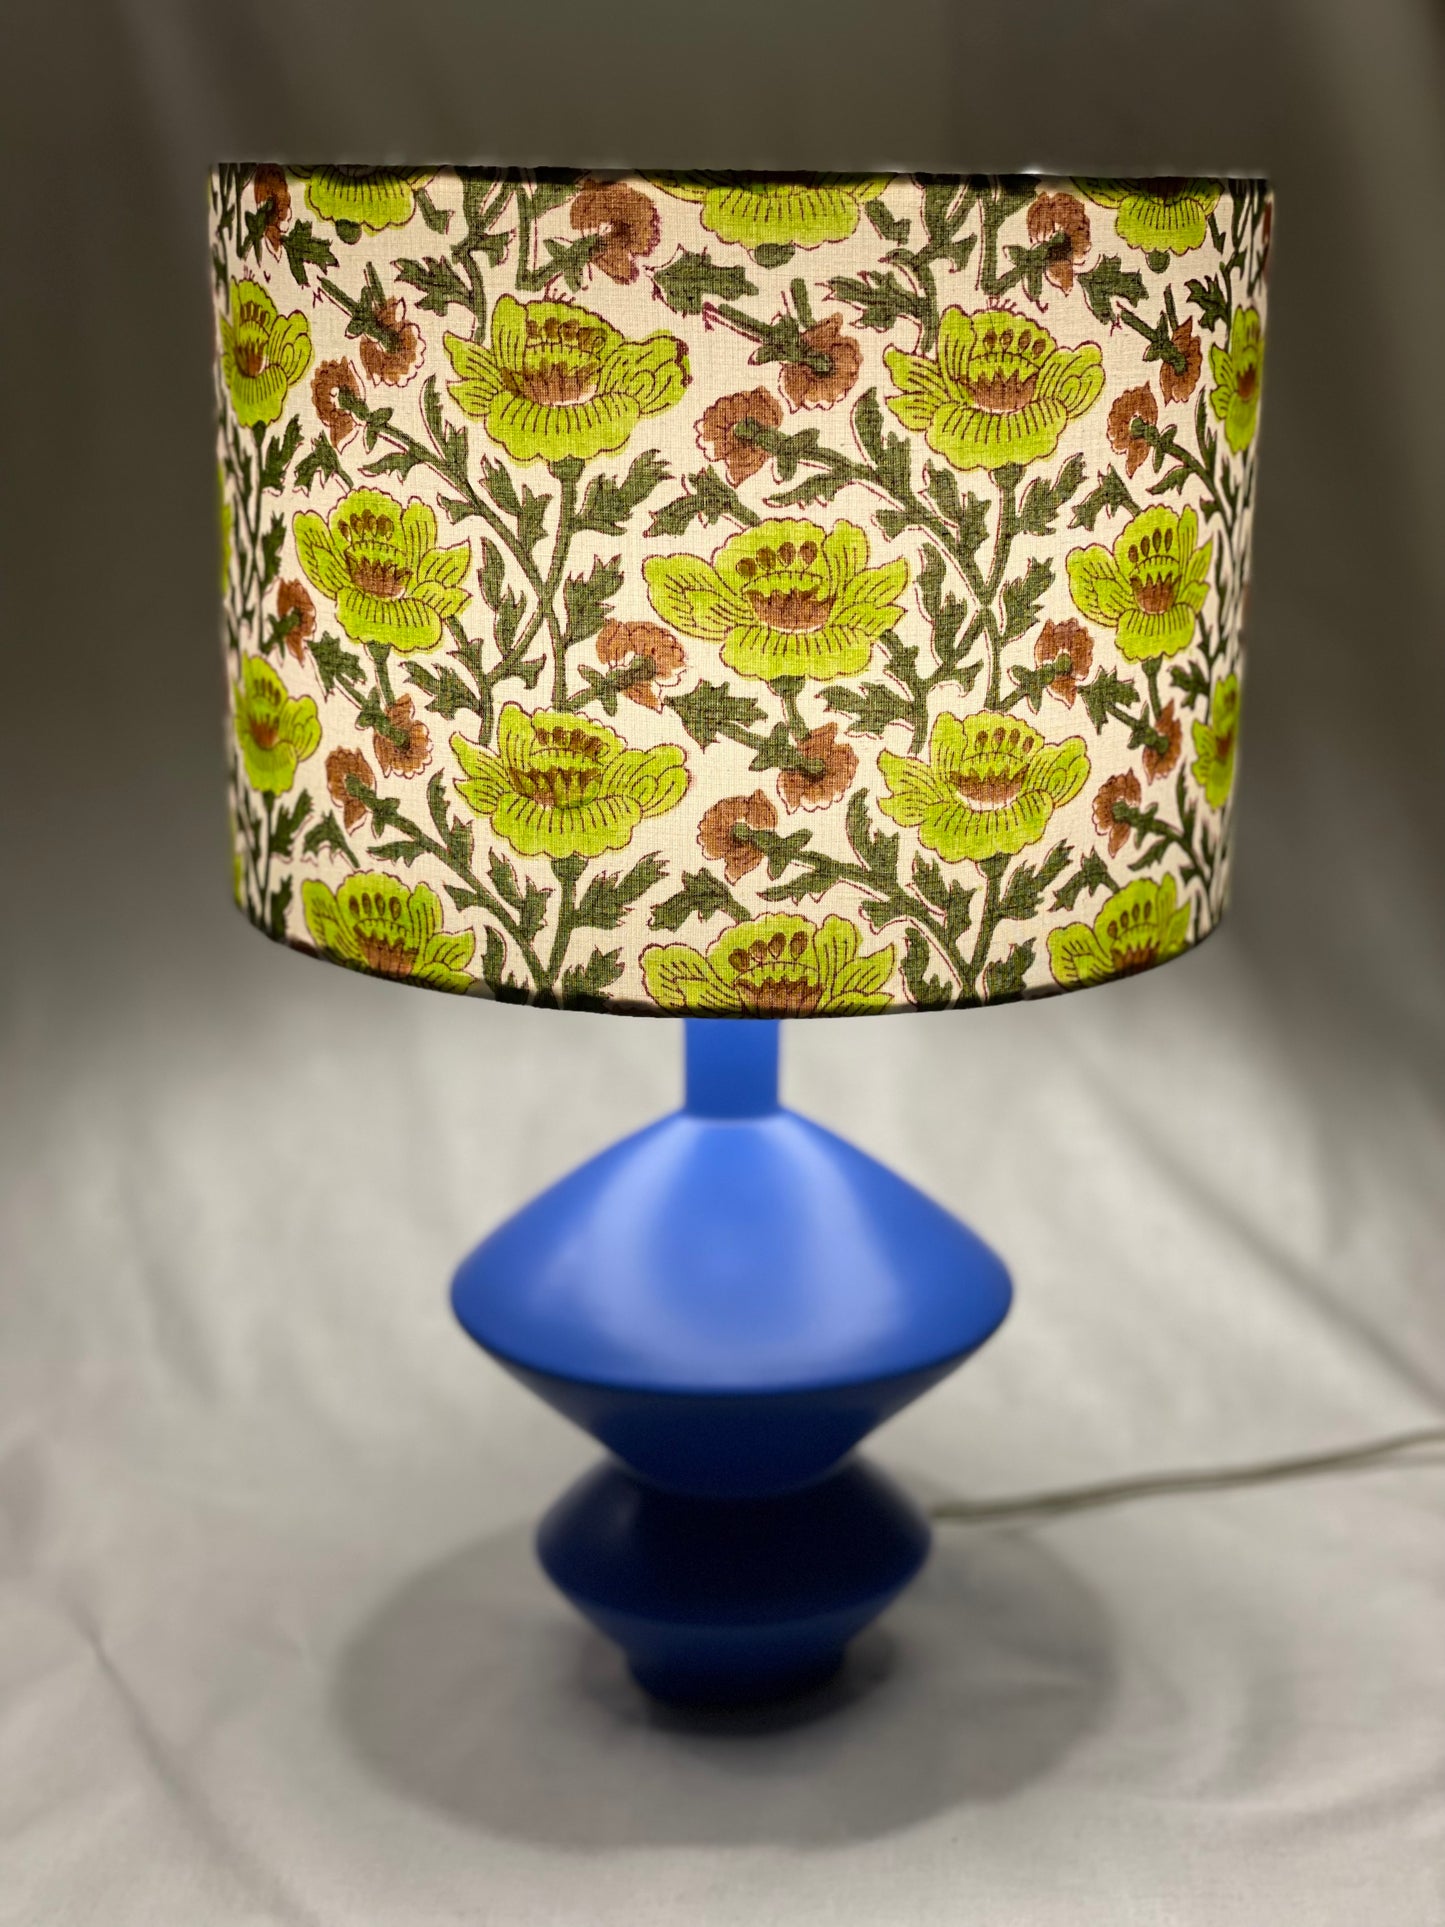 10 inch Drum Lampshade. Indian Block print from Jaipur. Apple Green, Dark Olive, and Coffee Brown Floral Motif on White.